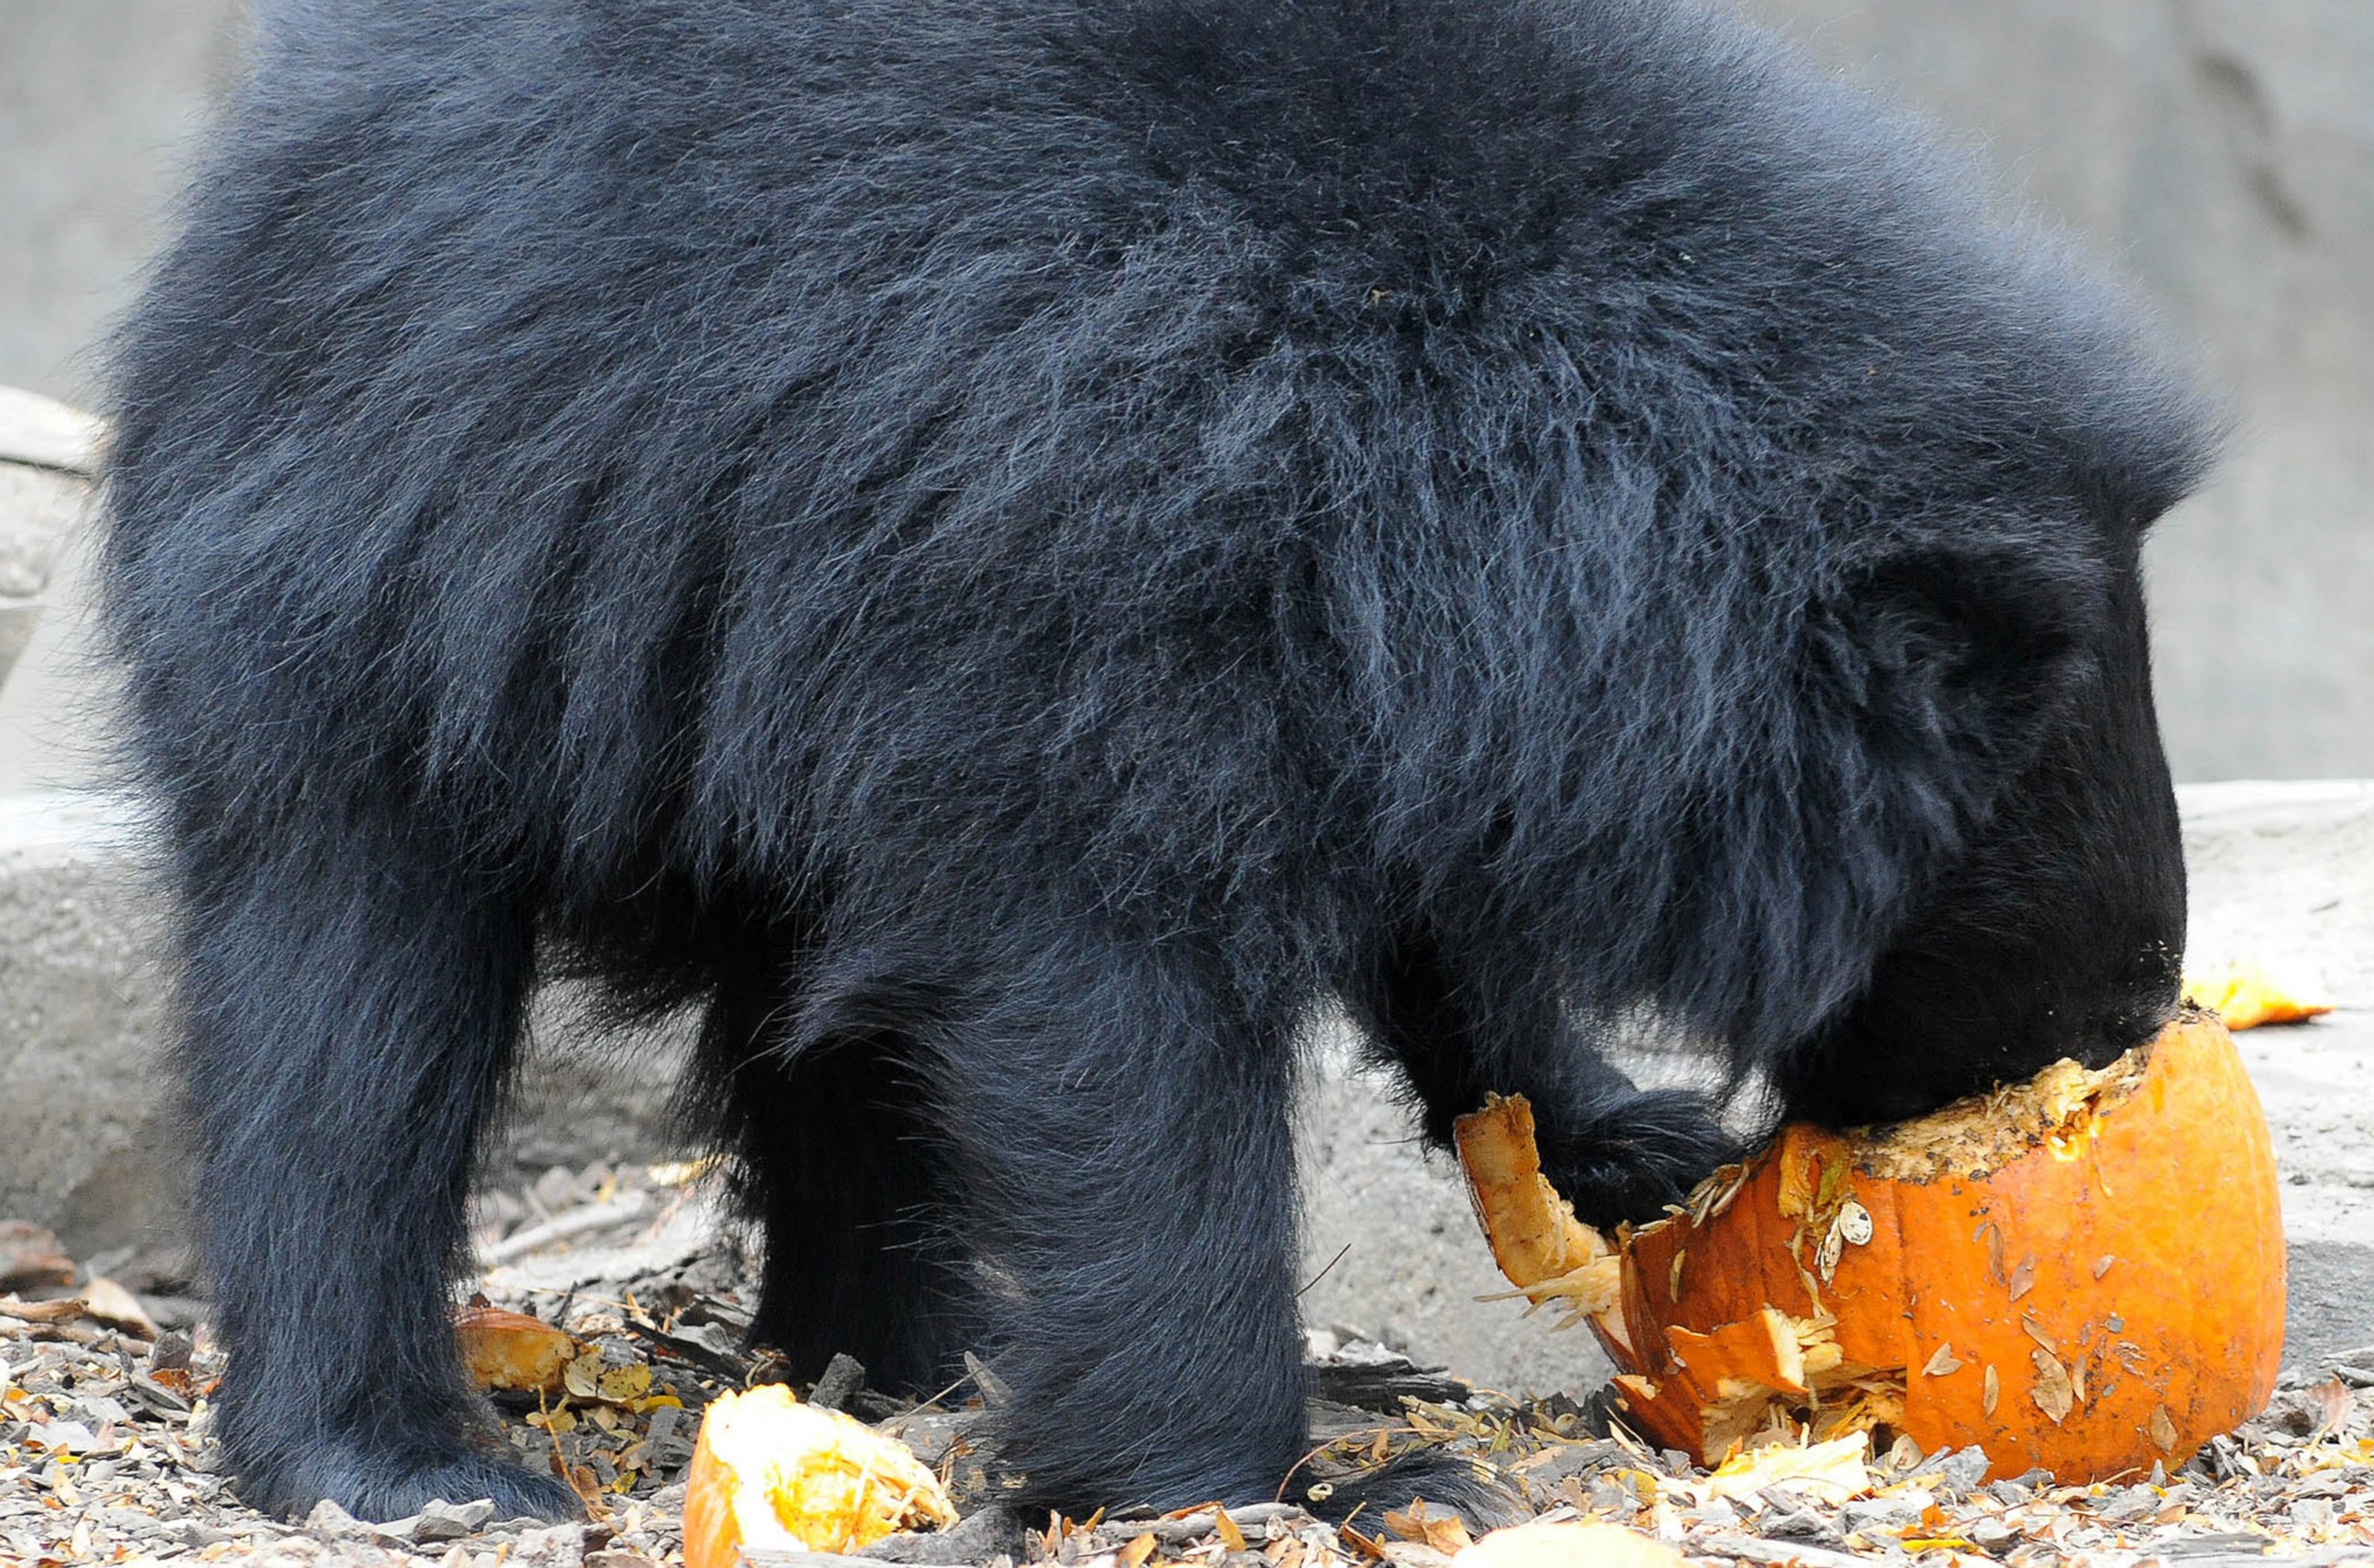 PHOTO: The Brookfield Zoo in Chicago has given a few animals pumpkins as a nutritious Halloween treat. 